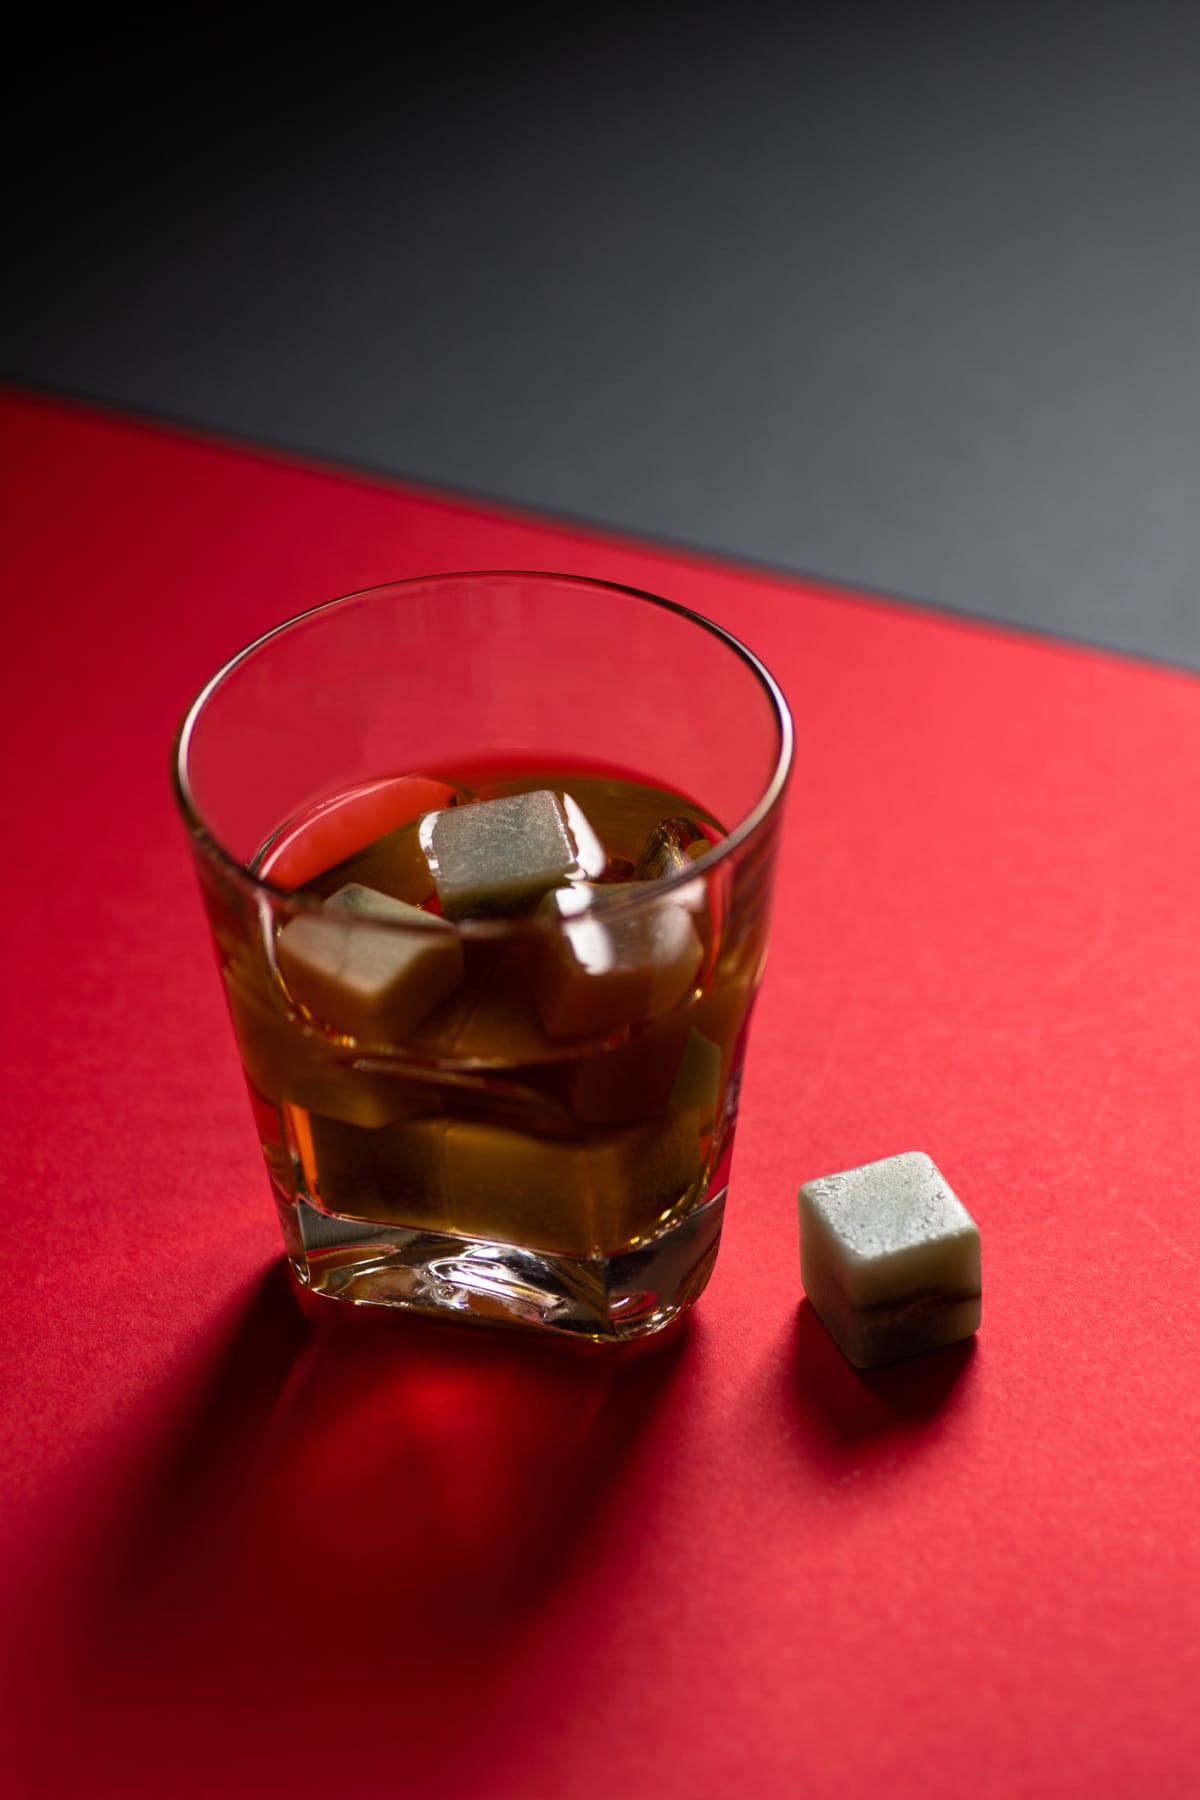 Whiskey and whiskey stones in a glass on a red and black background. Minimalistic composition. Copy space